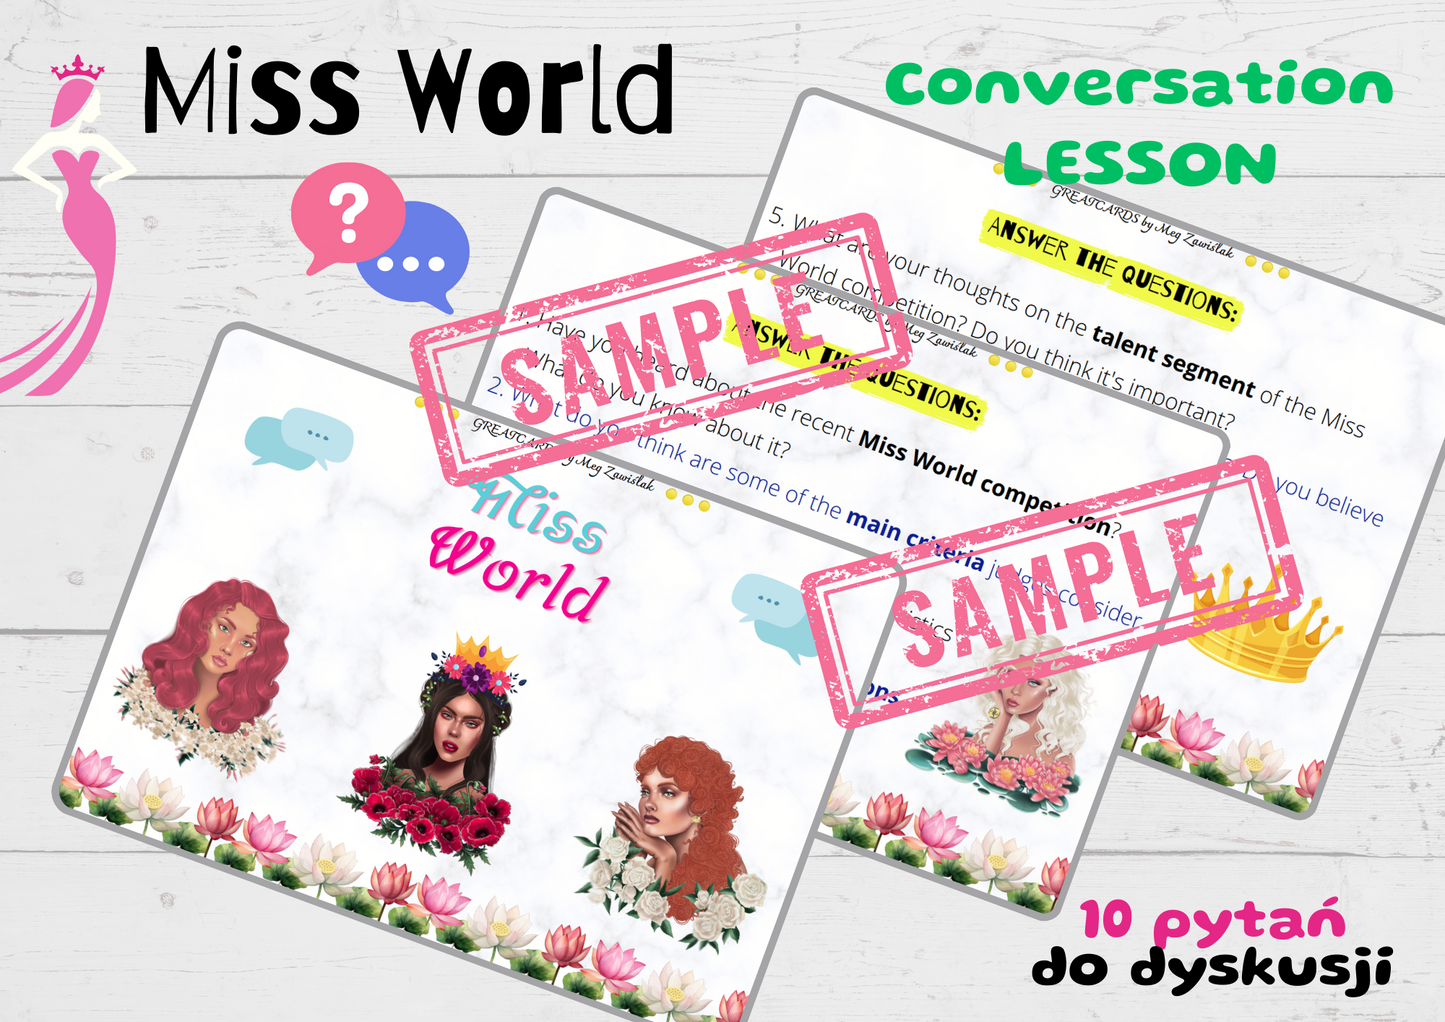 Greatcards - Miss World Conversation Lesson